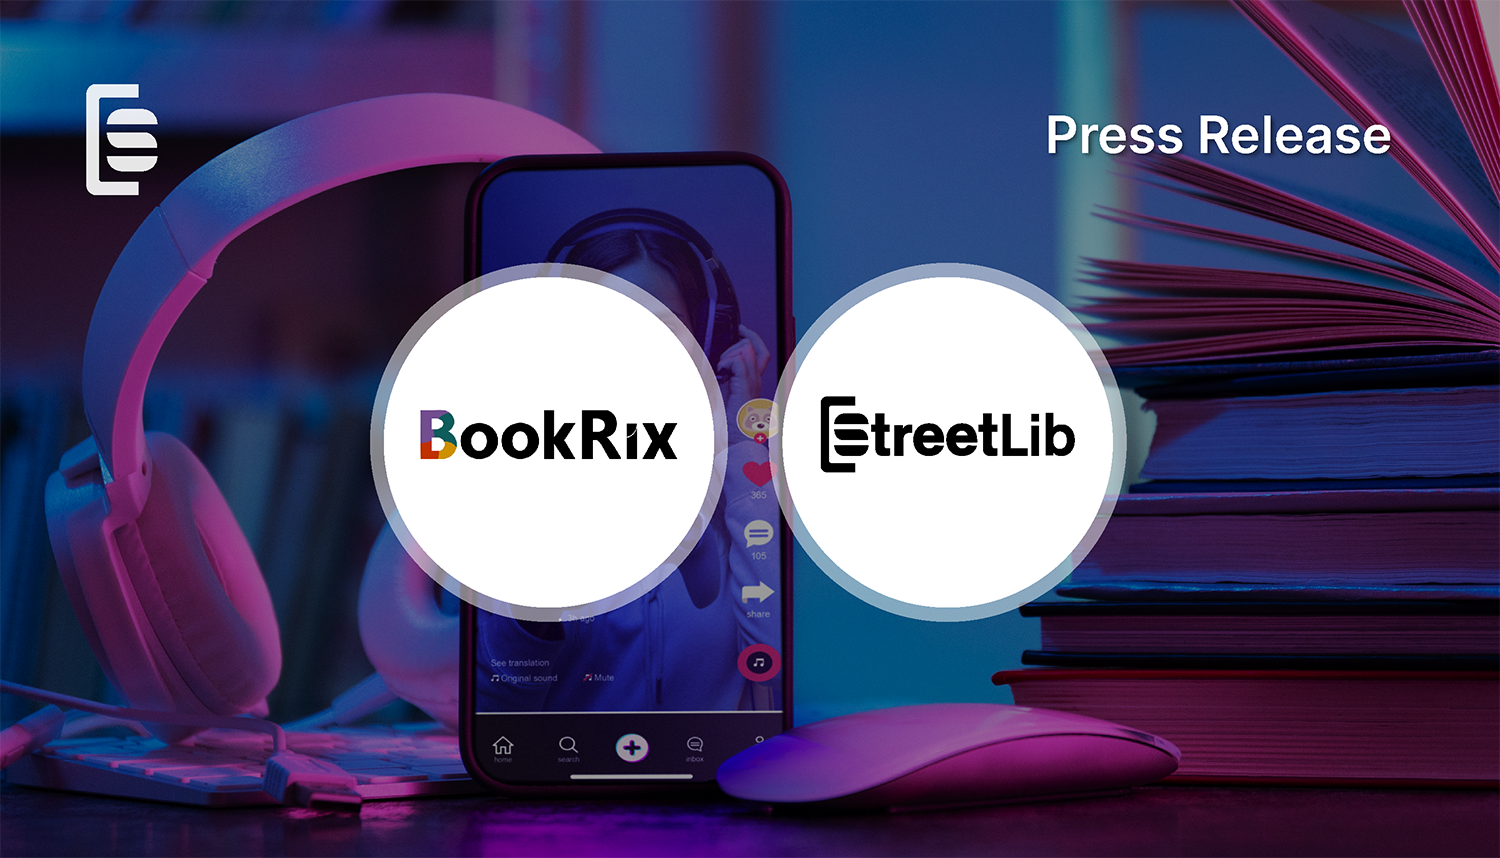 BookRix and StreetLib join forces to drive innovation in the book publishing industry